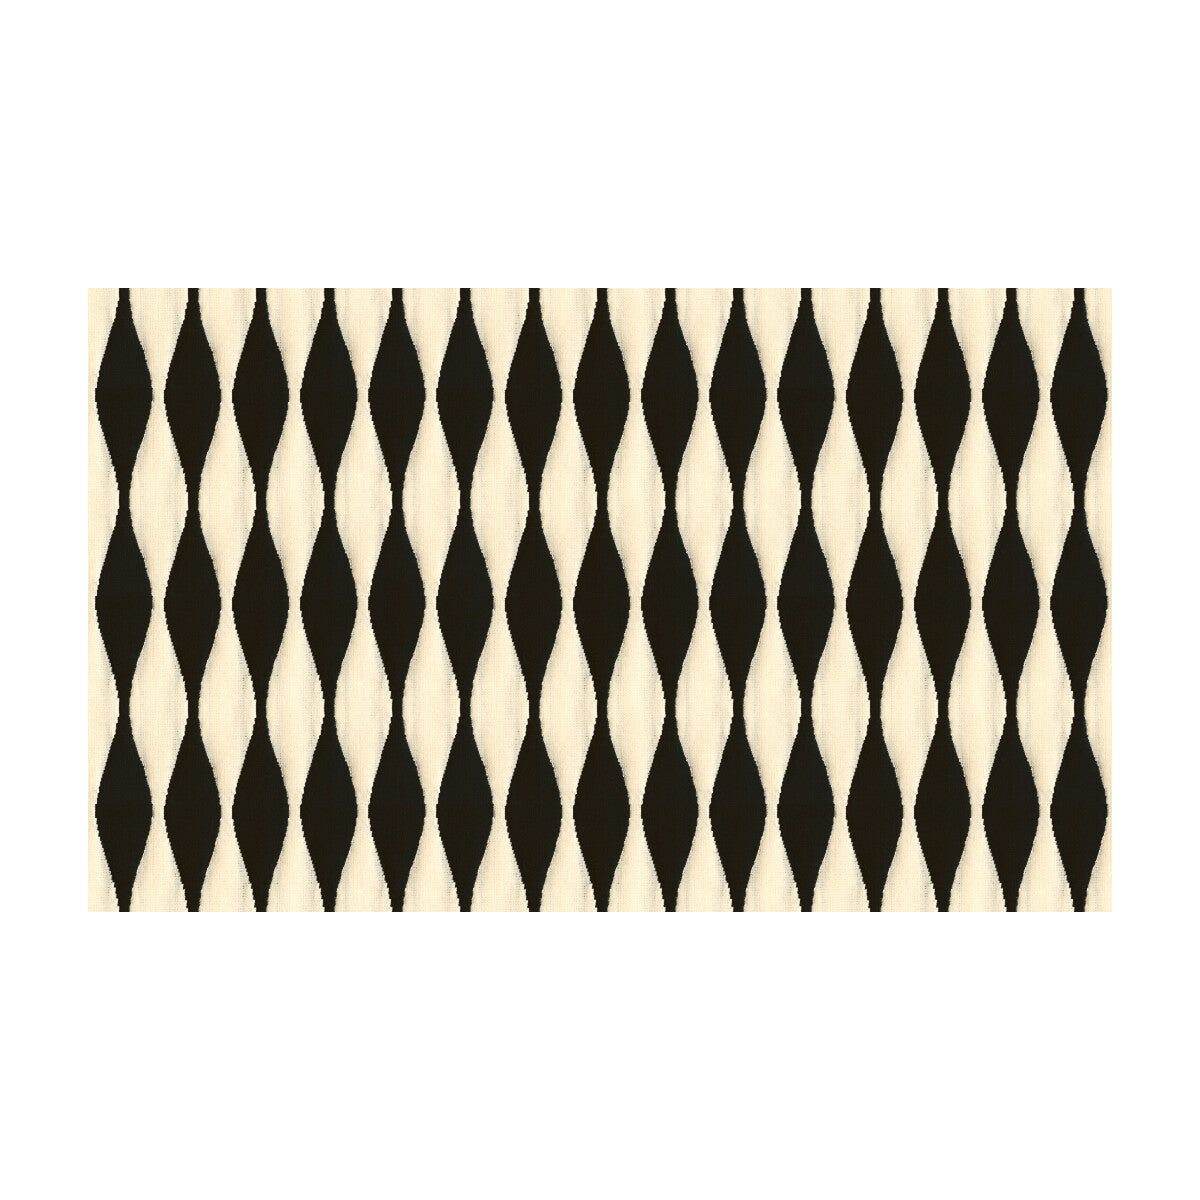 Baza fabric in licorice color - pattern 33658.81.0 - by Kravet Design in the Jonathan Adler Performance Fabrics collection